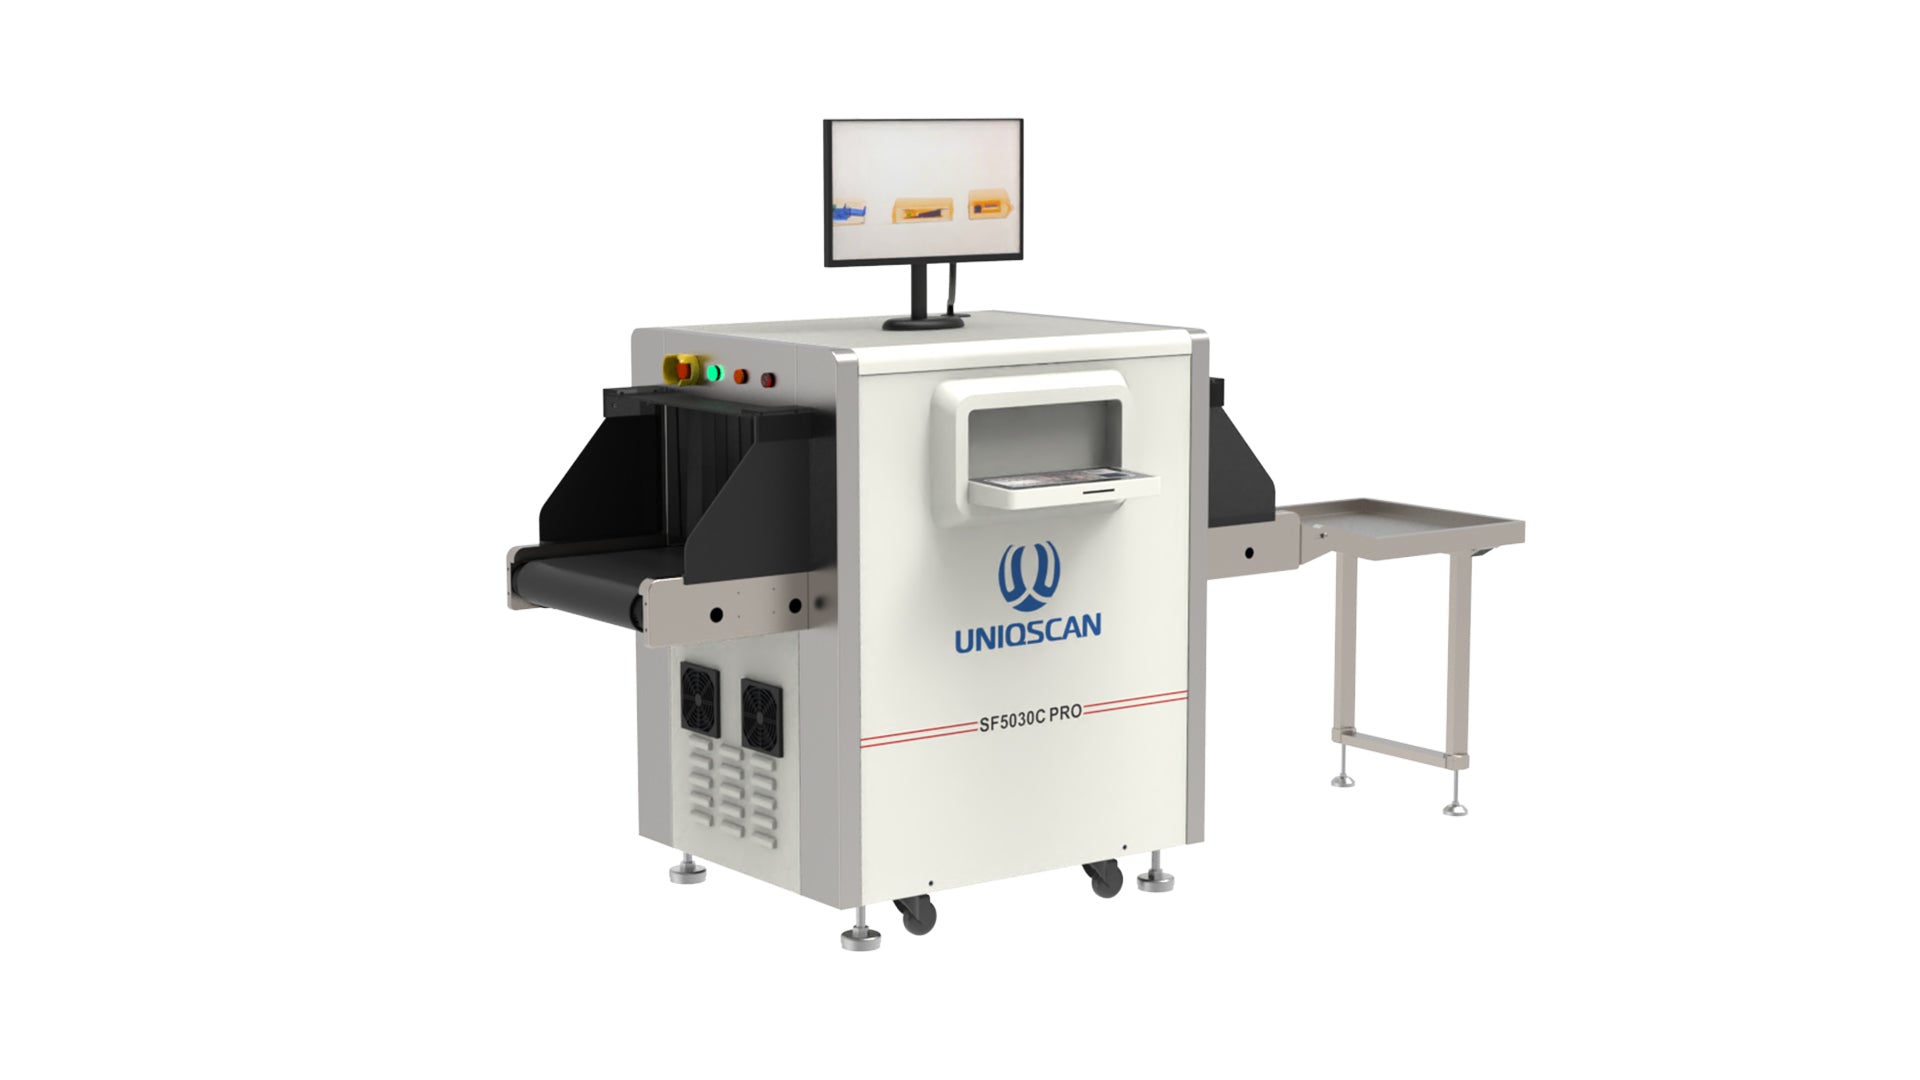 X-ray Baggage Scanner: SF100100